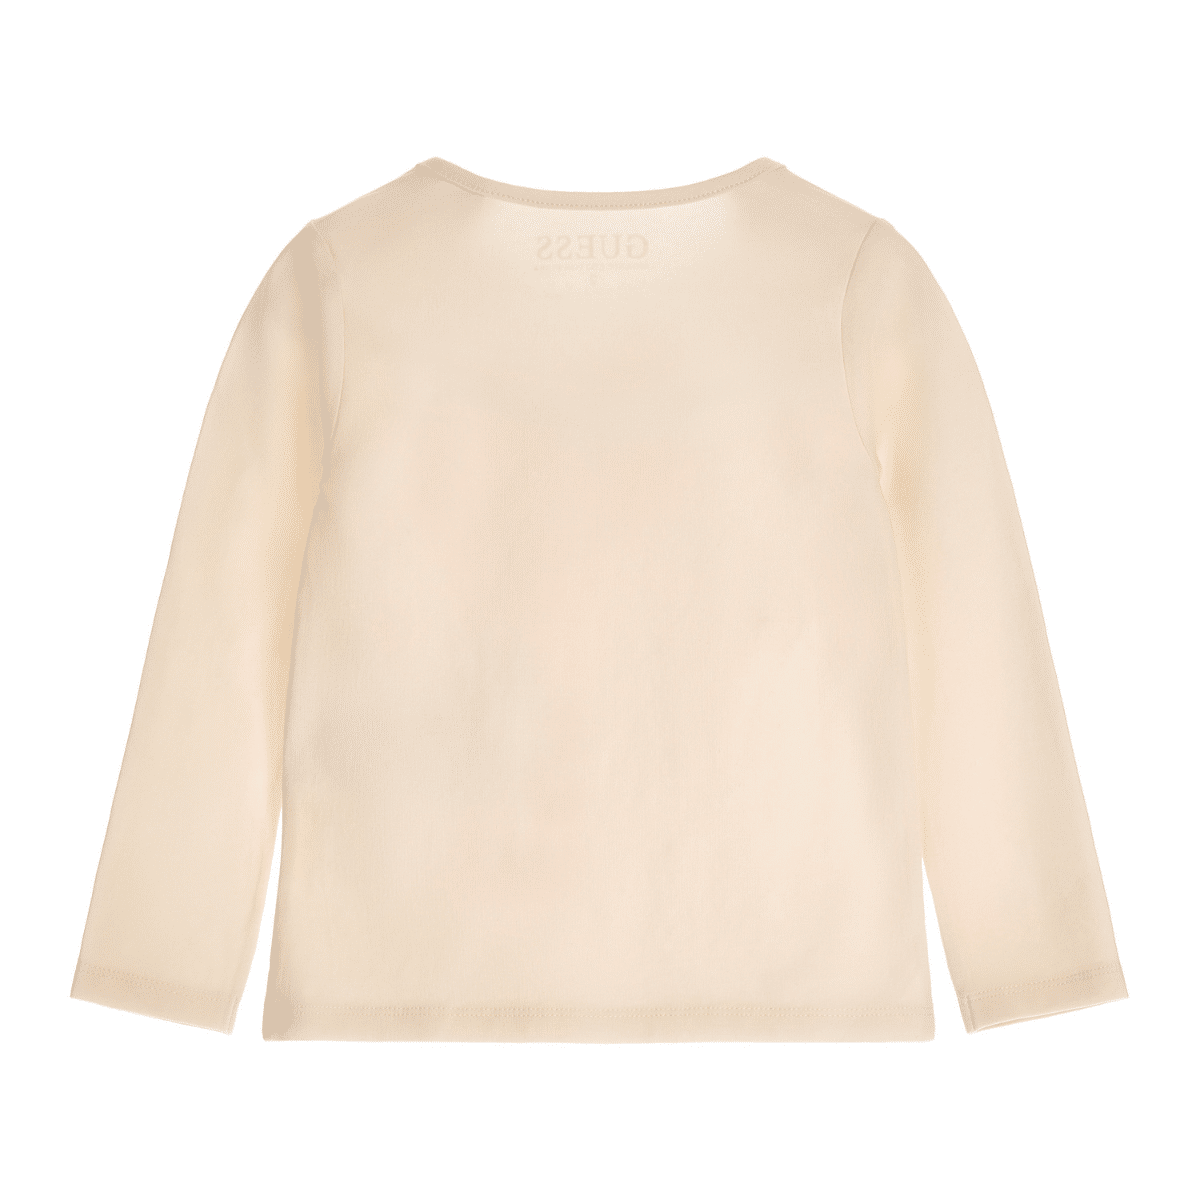 Guess girls long sleeved cream top with pastels logo back view